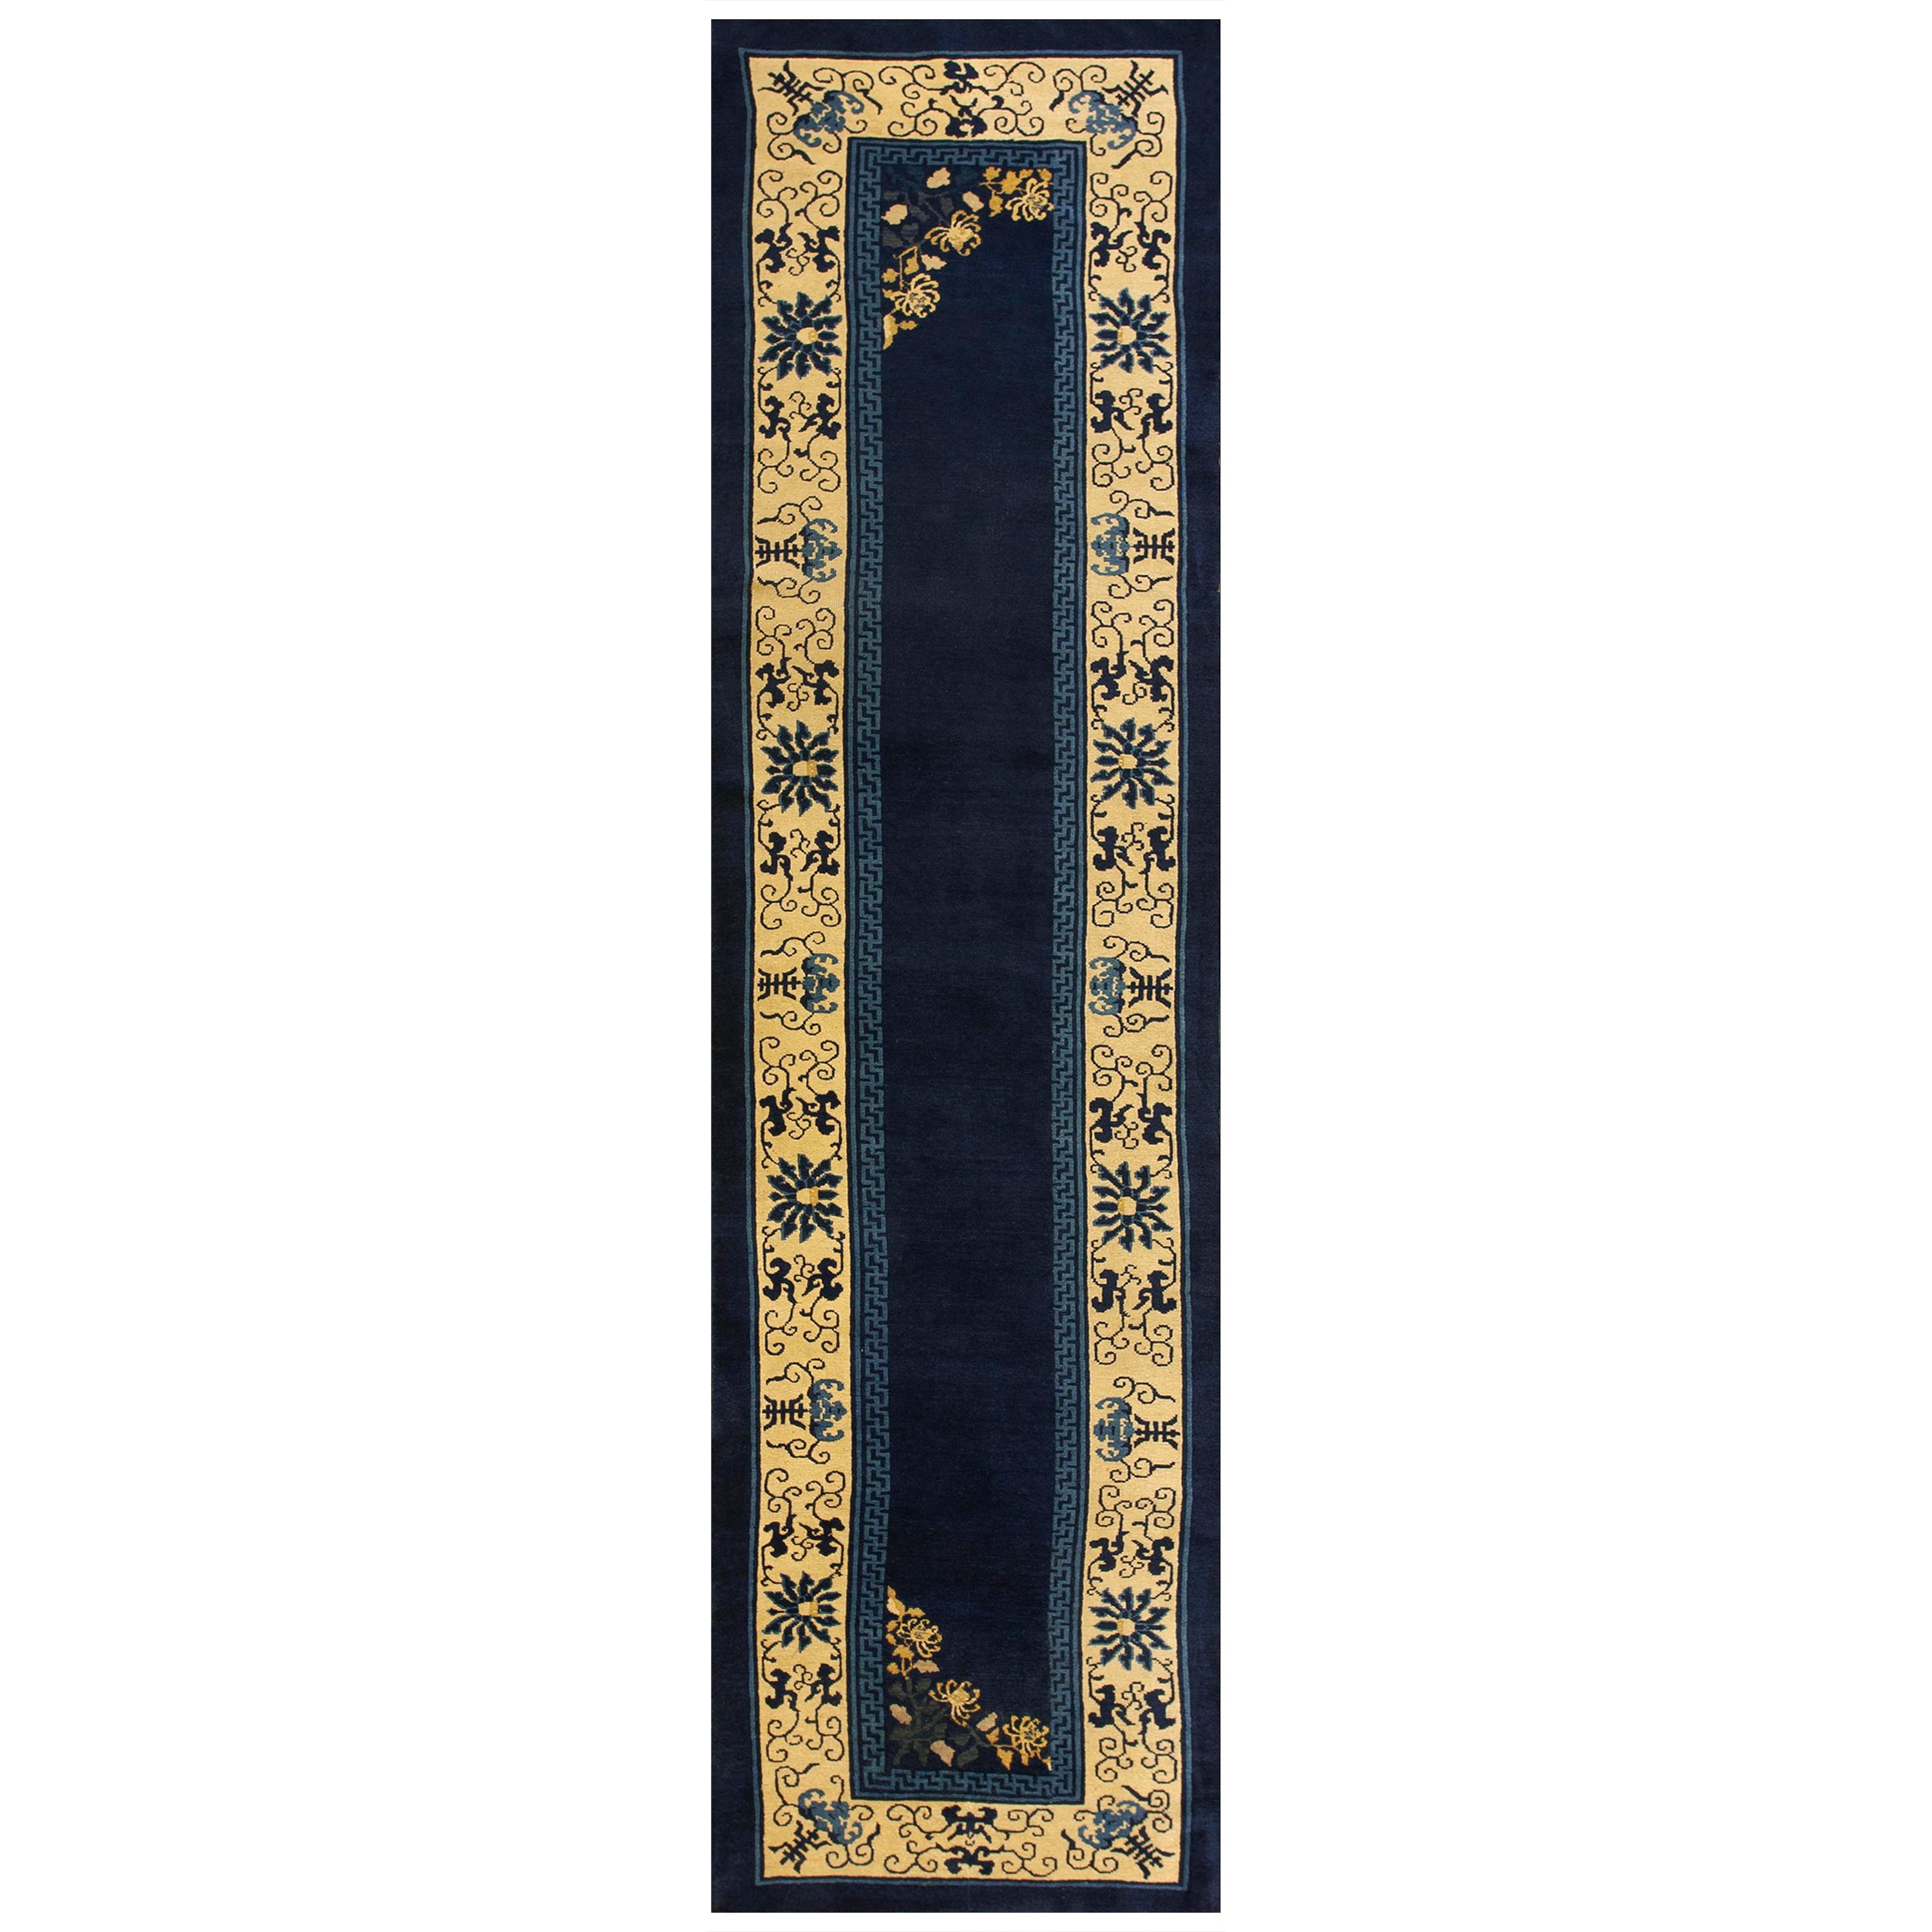 1920s Chinese Peking Carpet ( 2'10" x 11'6" - 85 x 350 ) For Sale